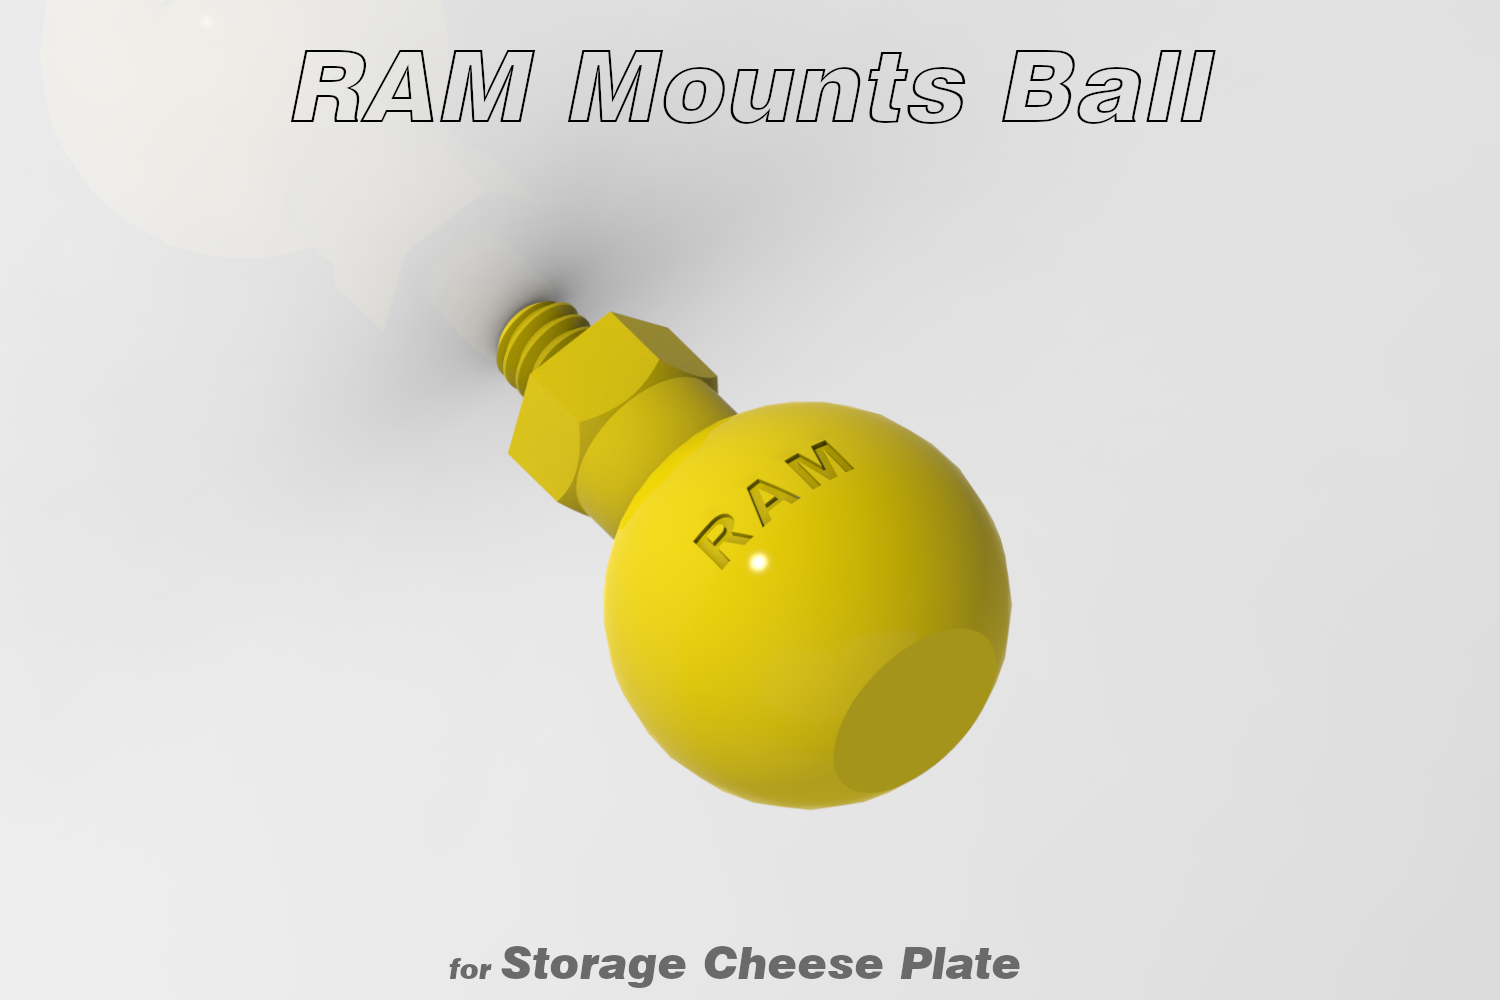 RAM Mounts Ball (for Storage Cheese Plate)